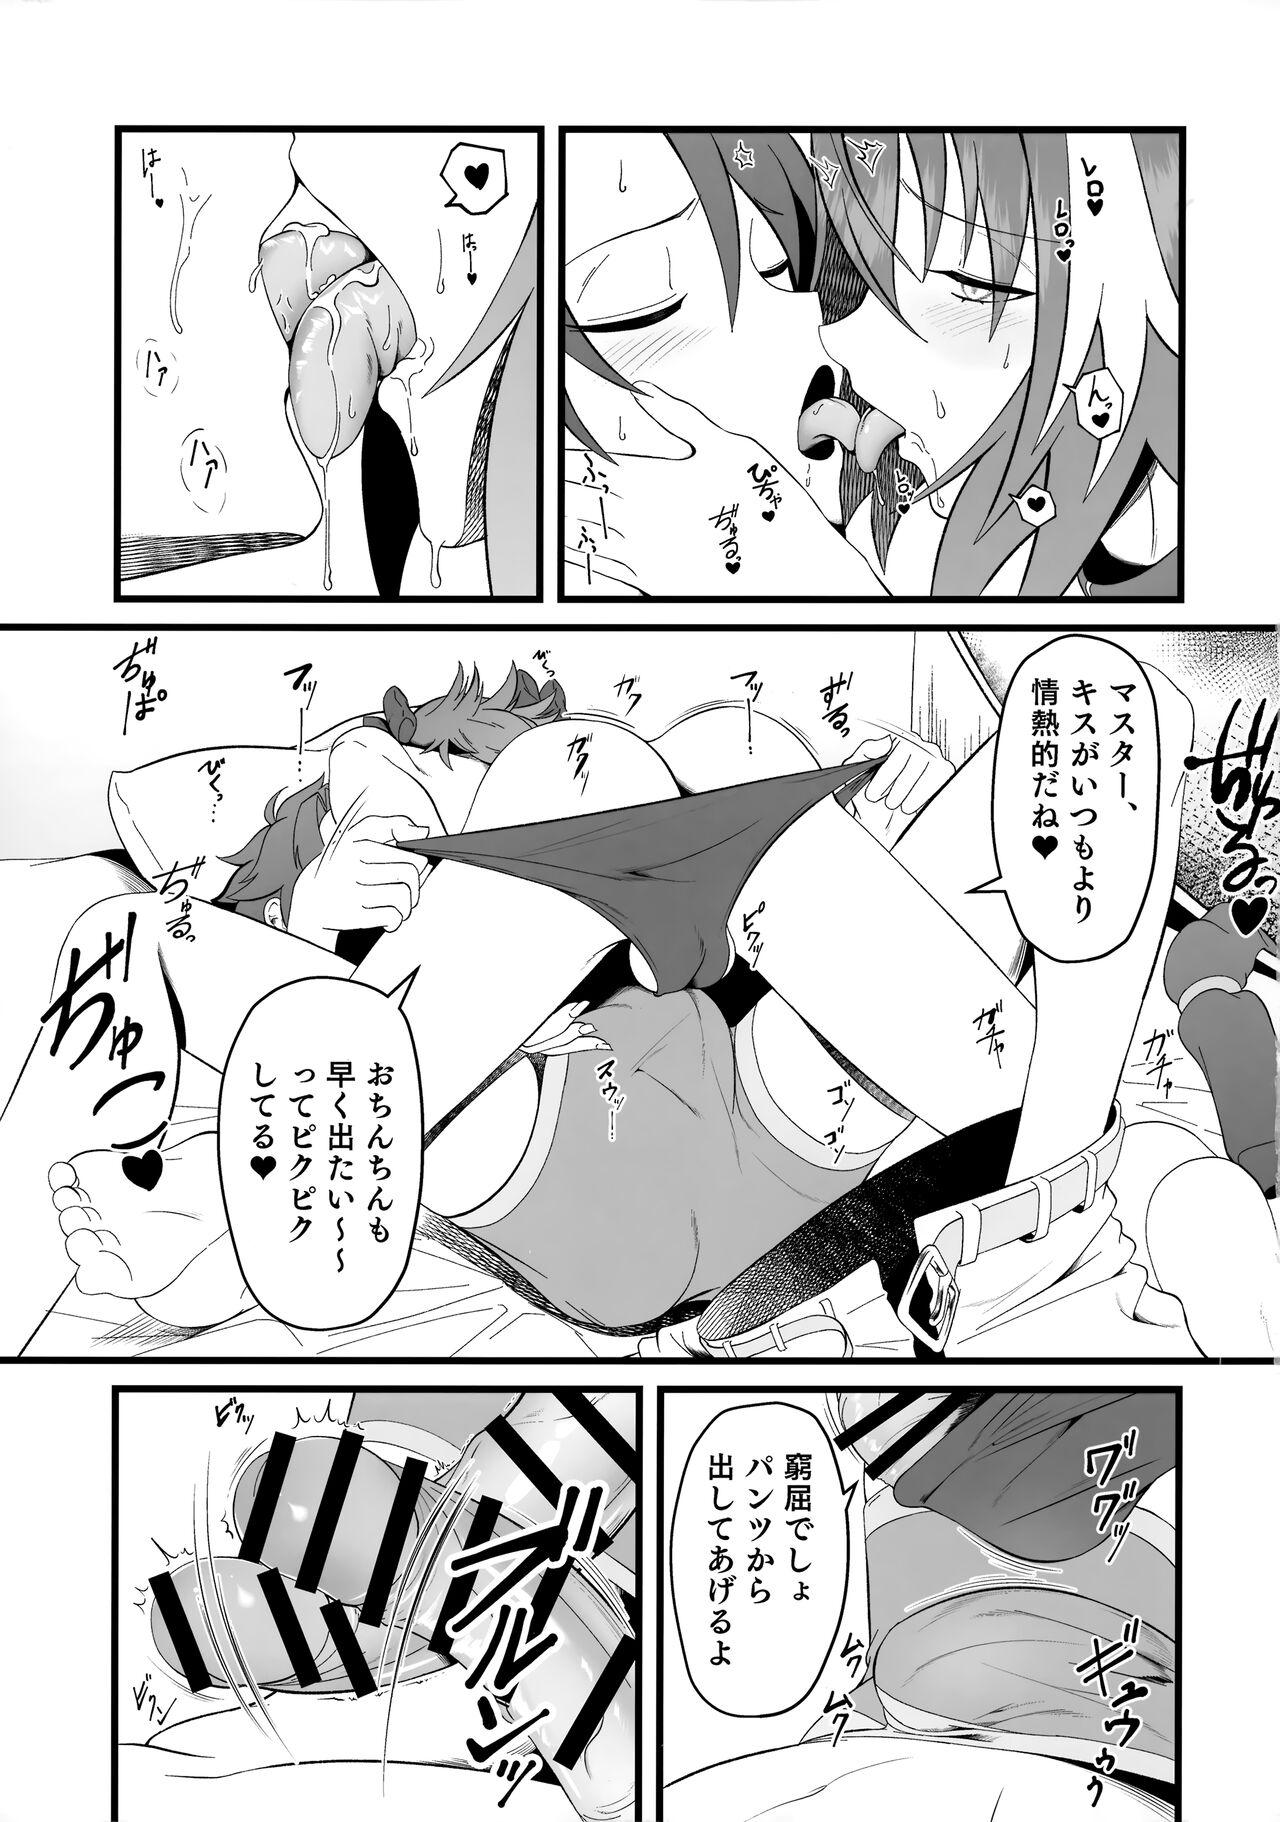 Cousin Kimi no Ichiban ni Naritakute - I wanted to be your number one. - Fate grand order Spank - Page 10